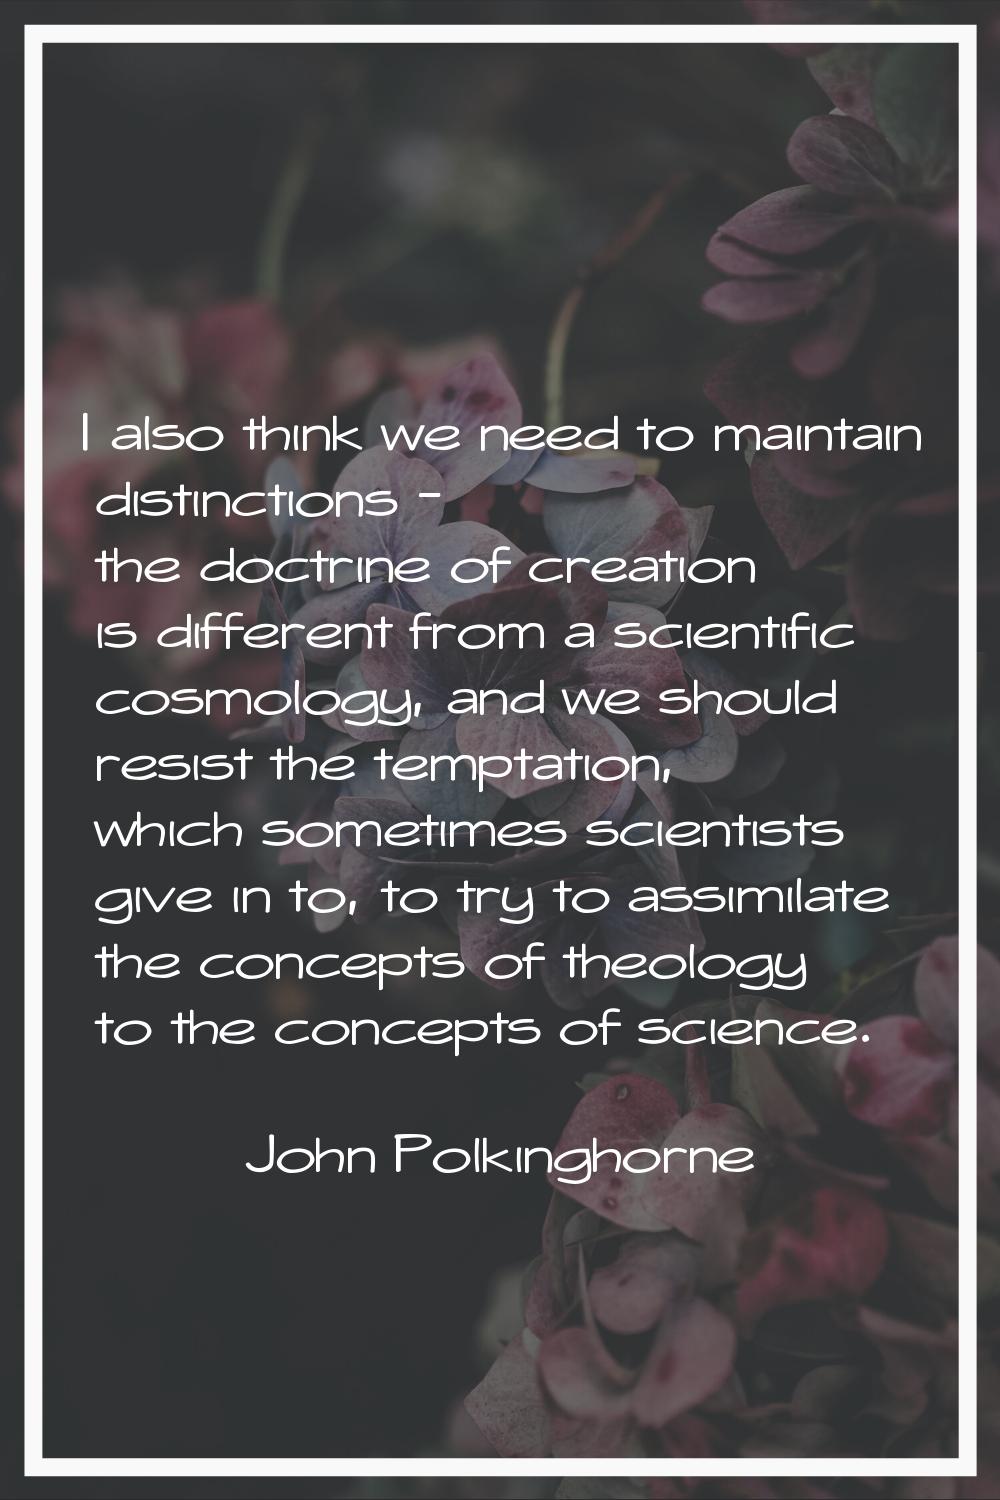 I also think we need to maintain distinctions - the doctrine of creation is different from a scient